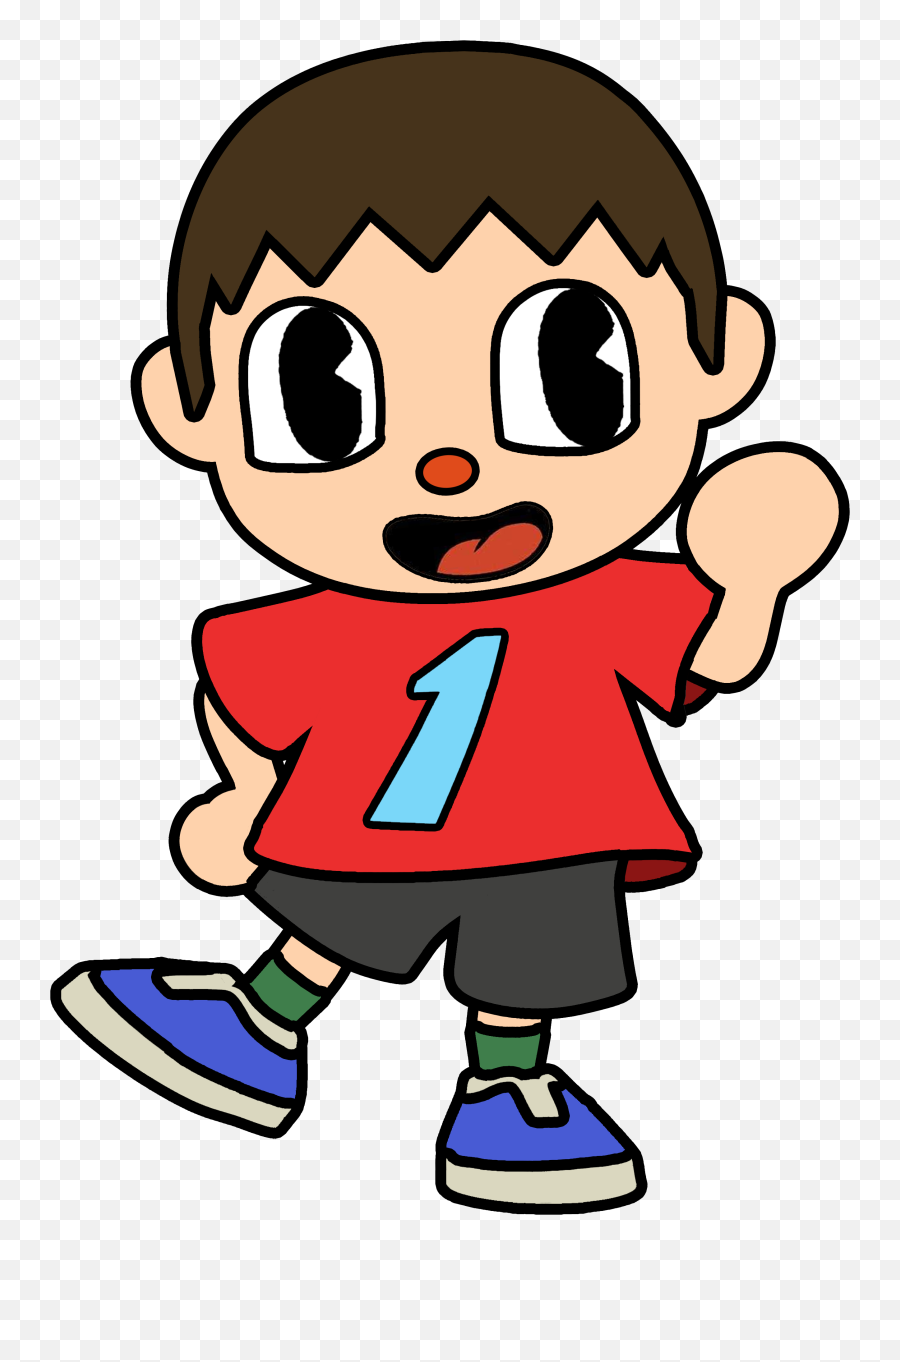 I Made The Villager From Animal Crossing In A Cuphead Style Emoji,Blush Animal Crossing Emotion